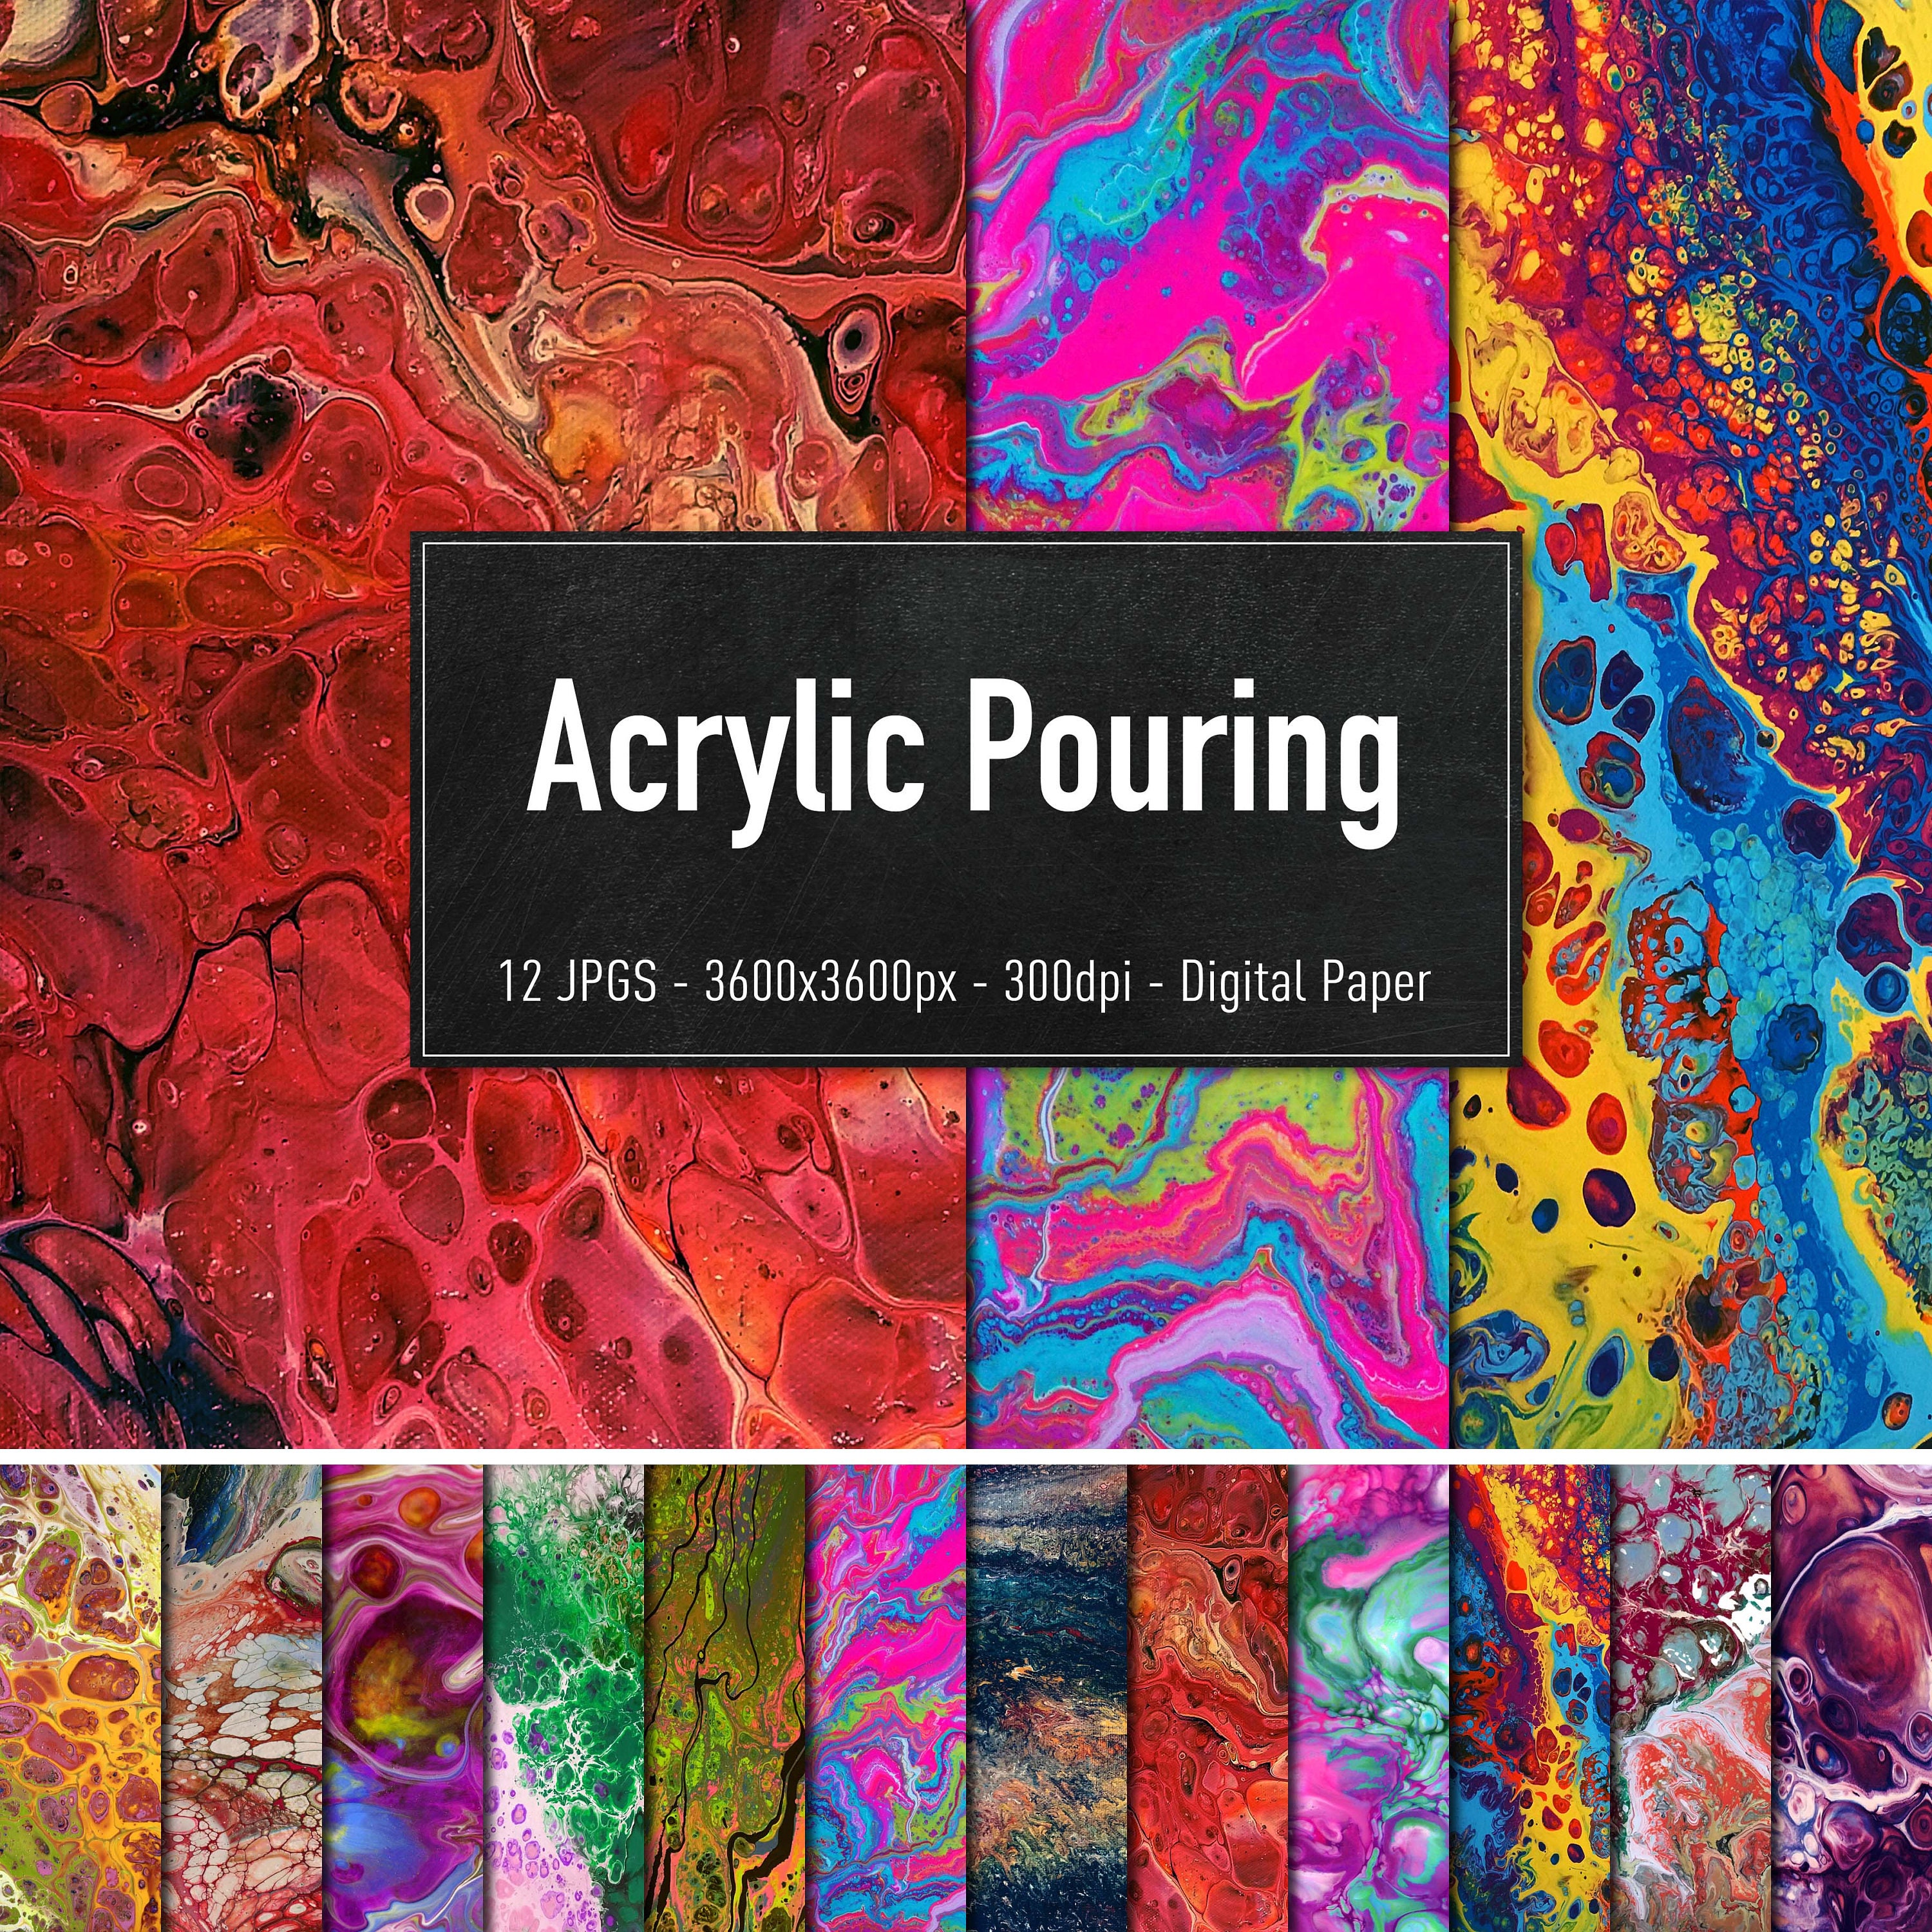 Acrylic Pouring Painting Kit: Flip Cup 